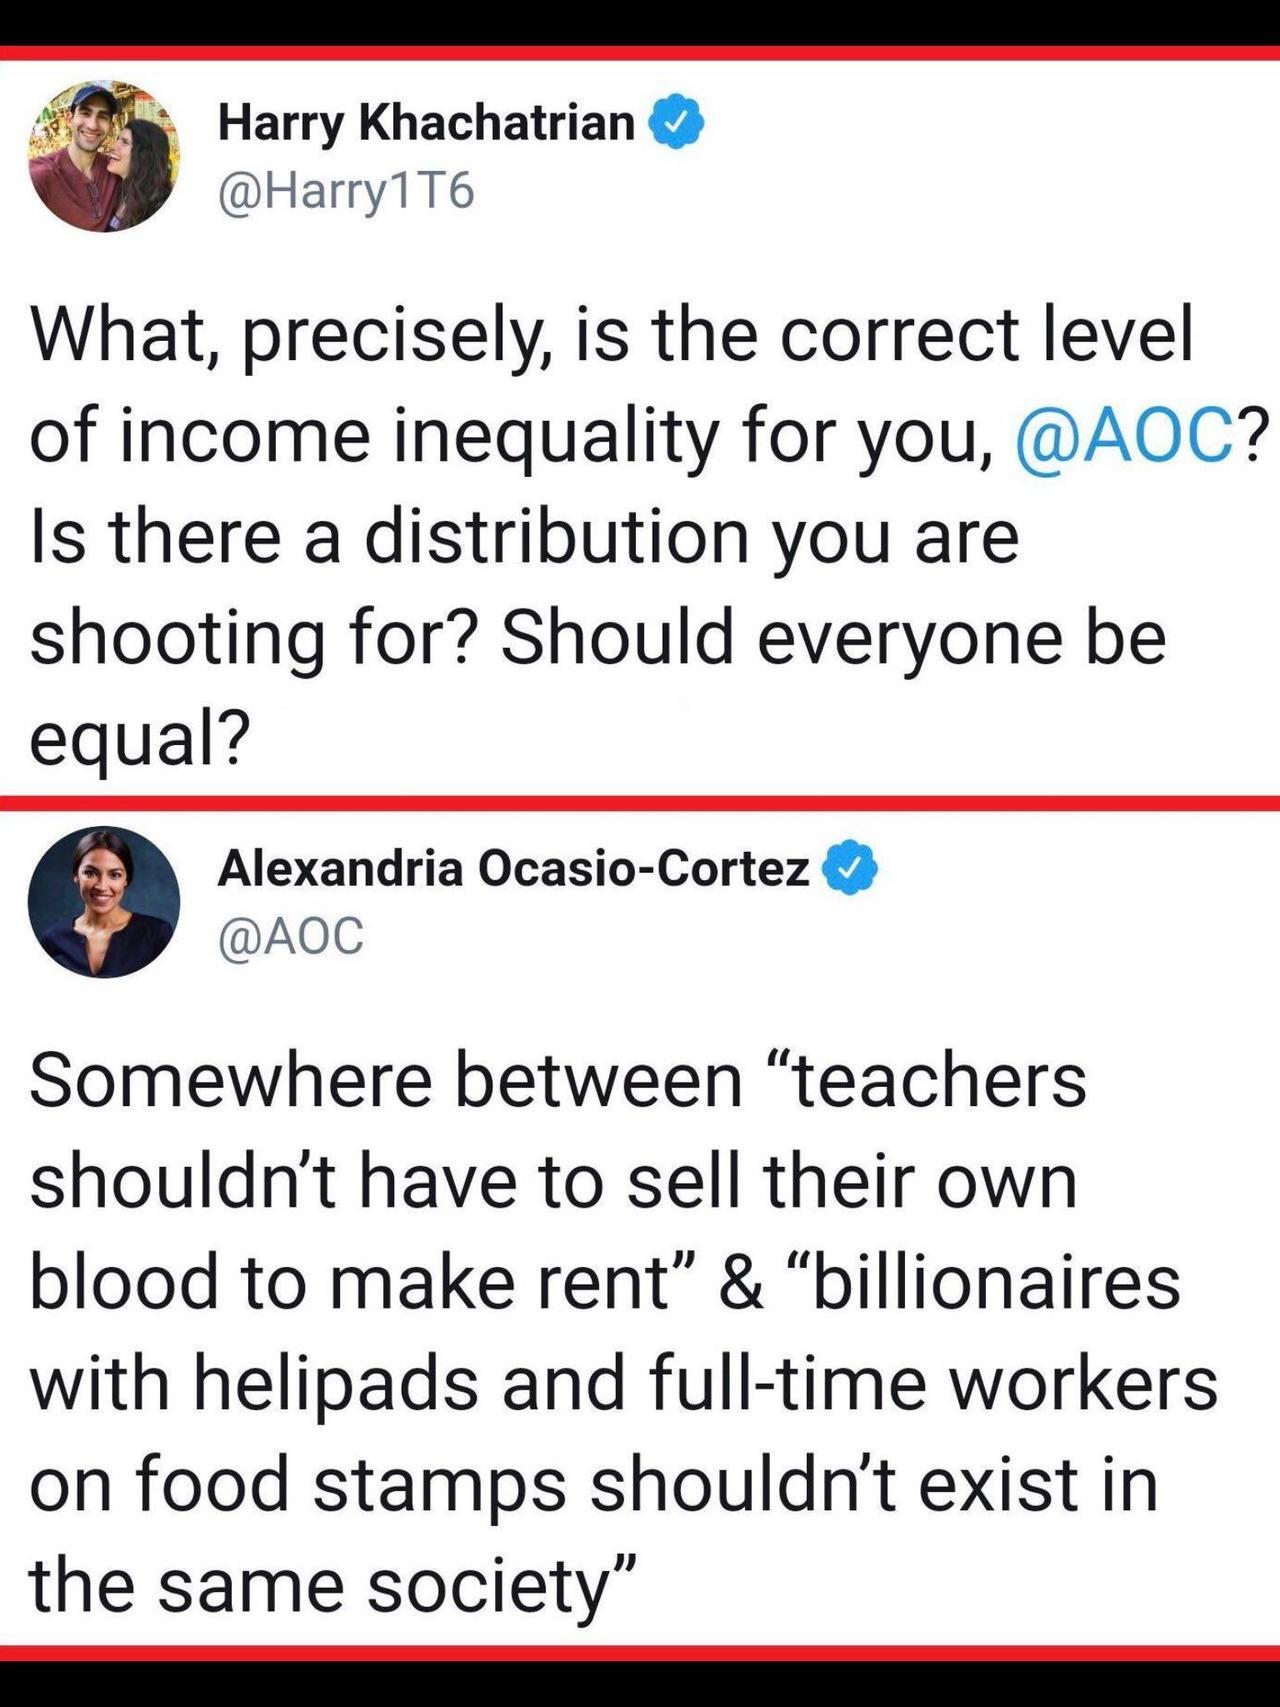 angle - Harry Khachatrian What, precisely, is the correct level of income inequality for you, ? Is there a distribution you are shooting for? Should everyone be equal? Alexandria OcasioCortez Somewhere between teachers shouldn't have to sell their own blo